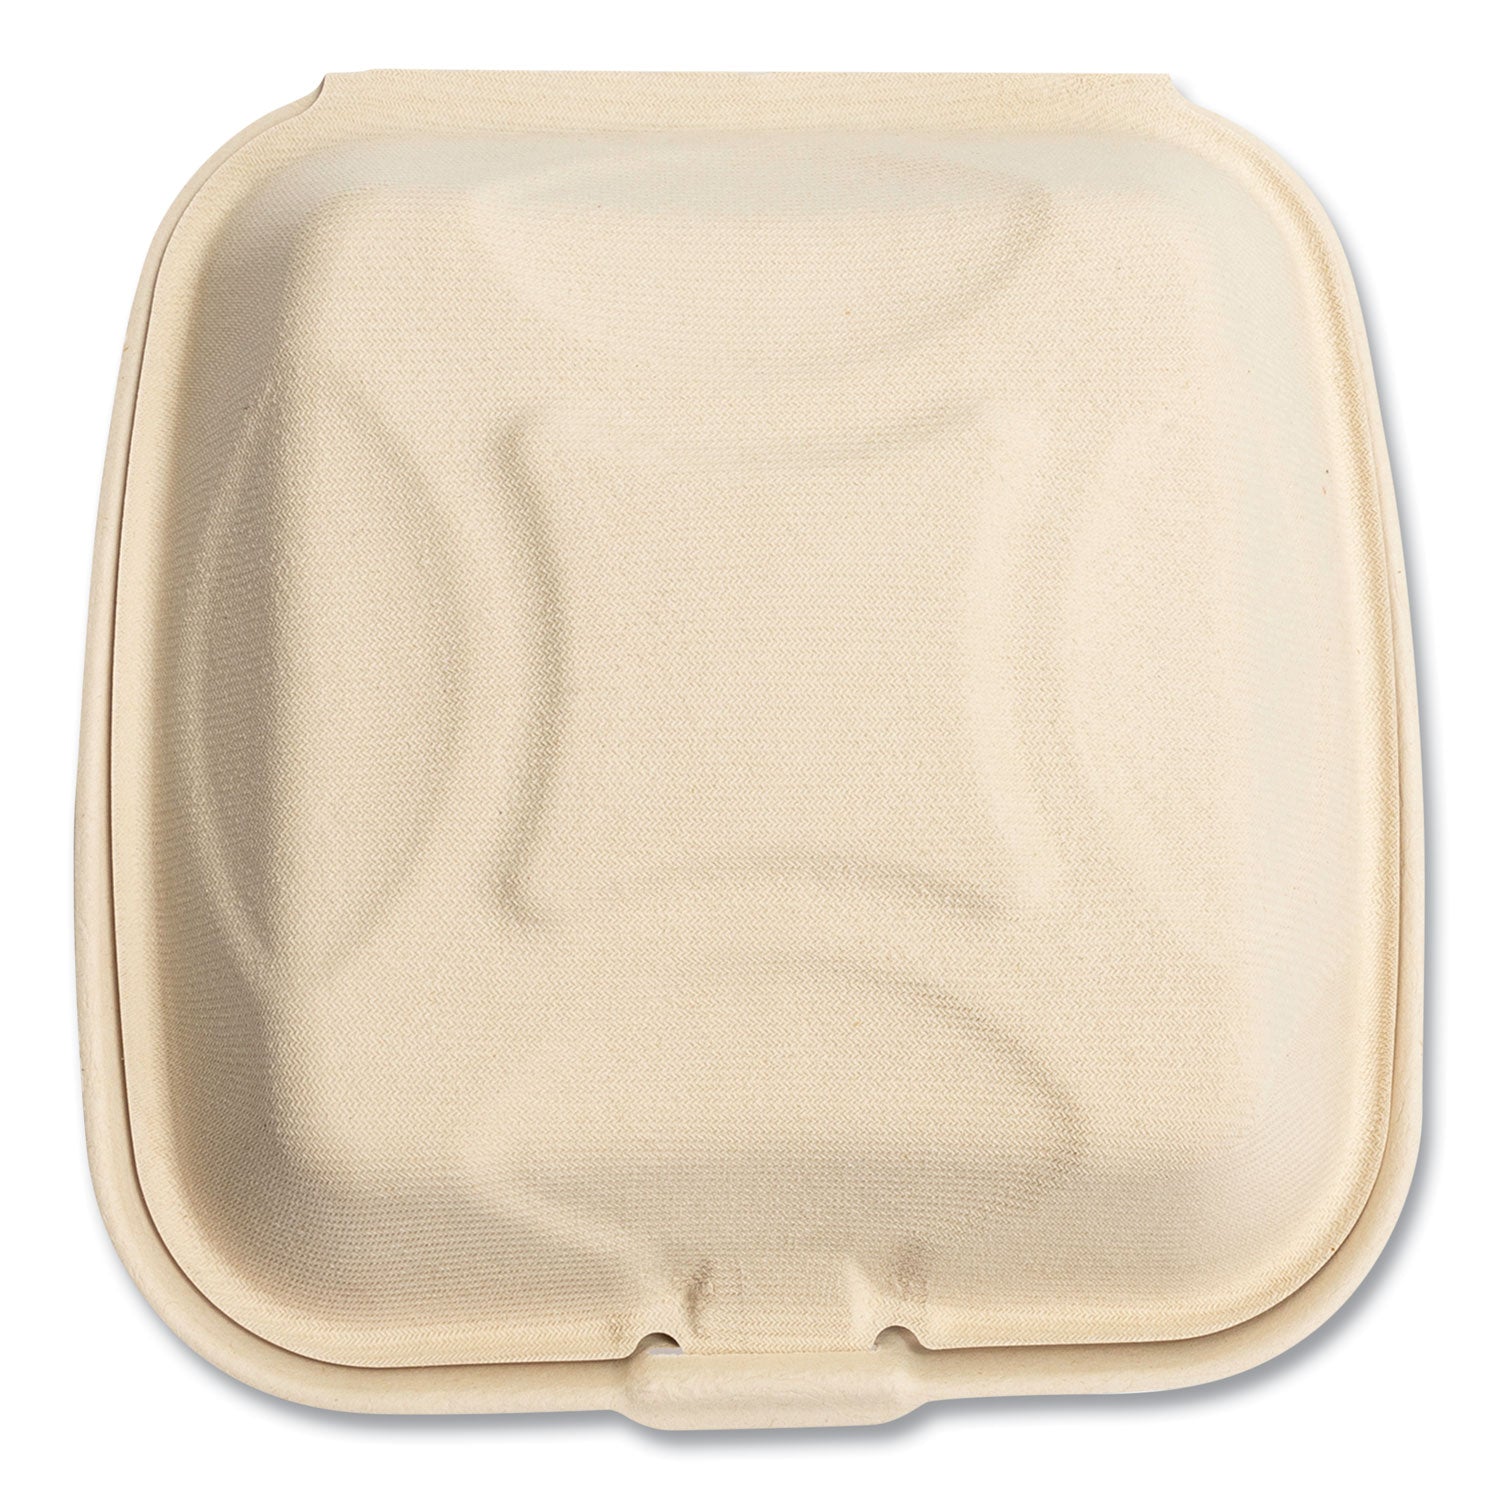 bagasse-pfas-free-food-containers-1-compartment-9-x-193-x-9-tan-bamboo-sugarcane-100-sleeve-2-sleeves-carton_bwkhnge991cnpfa - 3